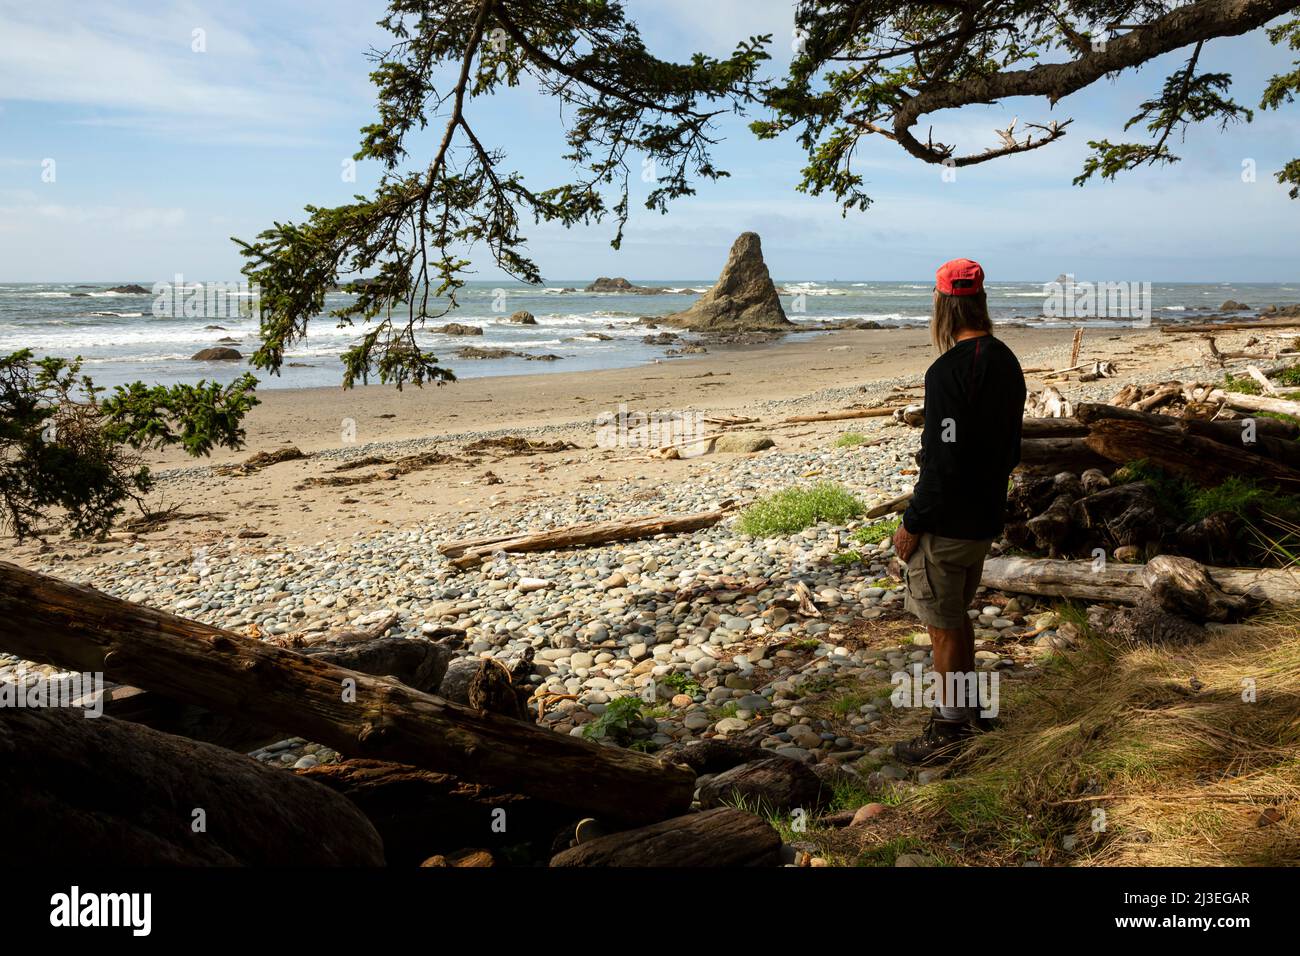 WA21361-00...WASHINGTON - Hiker at Cedar Creek overlooking the Pacific Ocean on the wilderness coast section of Olympic National Park. Stock Photo